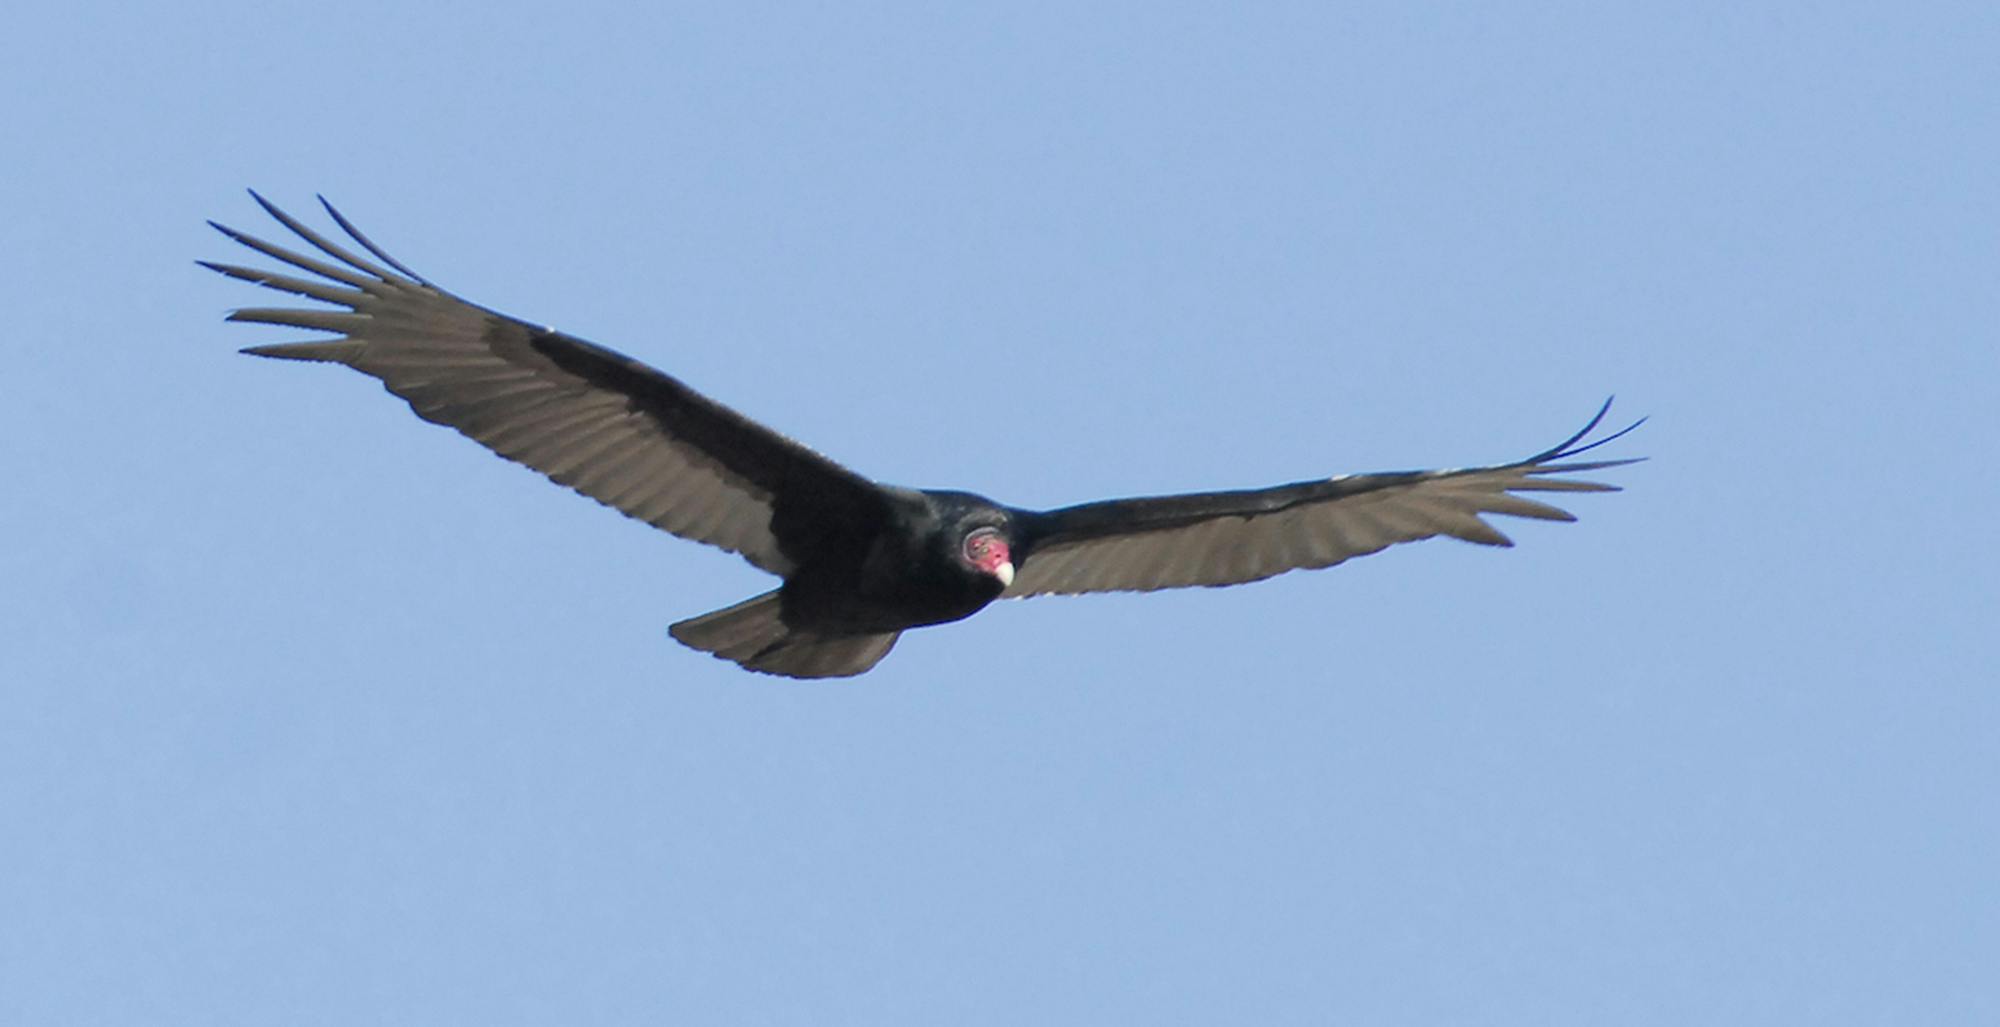 Turkey vultures have a 6-foot wingspan. In flight they hold their wings in a V shape and rarely flap them, an easy way to identify them from the ground.